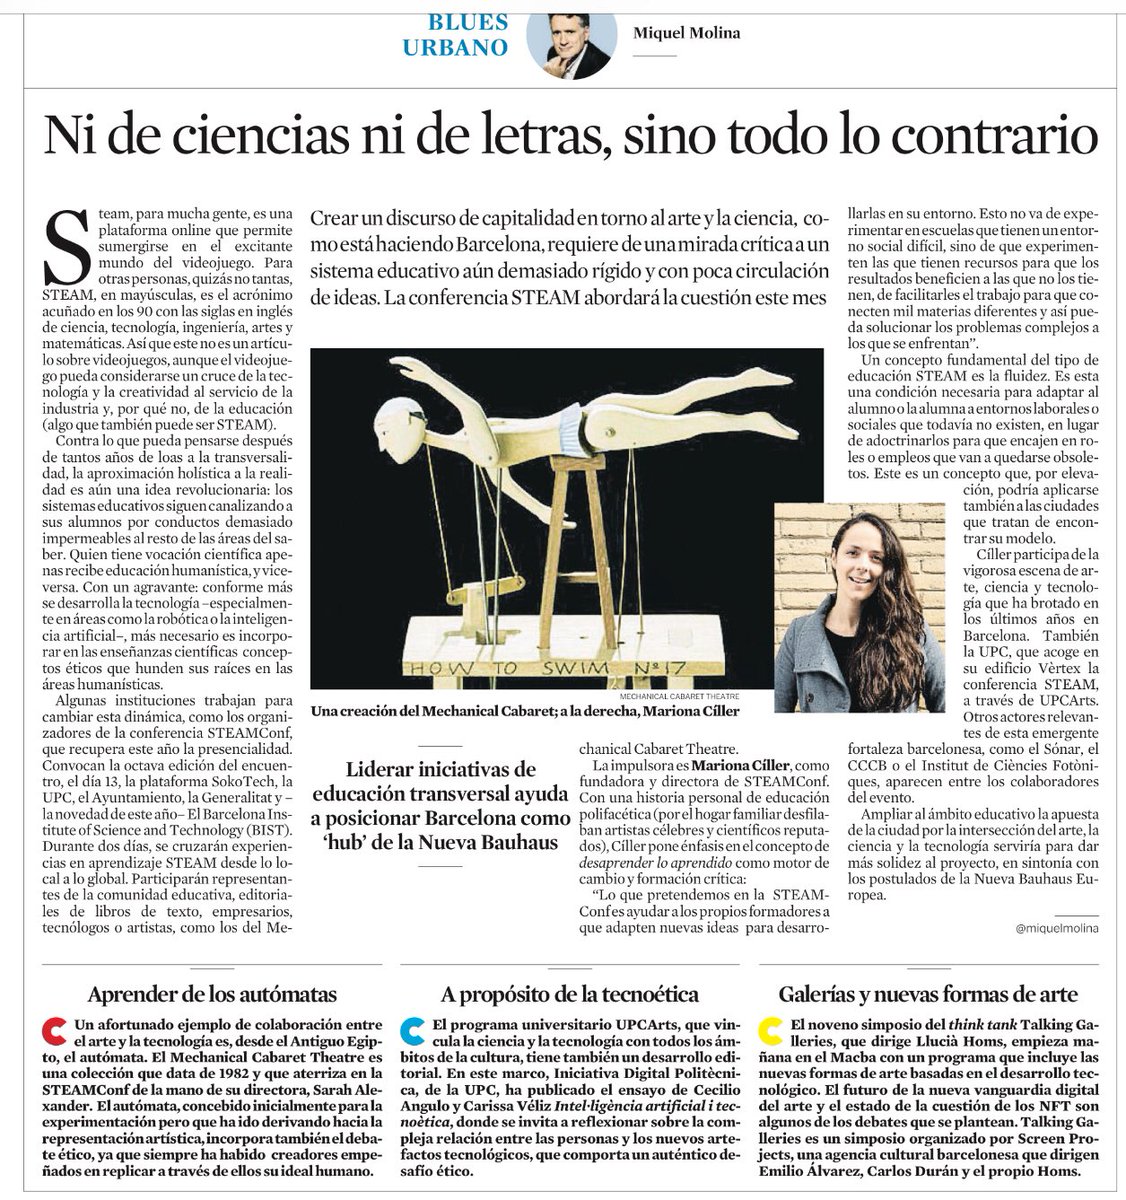 Neither science nor letters, but quite the opposite. 
On @steambarcelona Congress
 w/
@UPC_Arts
@_BIST
@mariondita
@CarmeFenoll 
@francesca_bria
At #BluesUrbano By @miquelmolina today at @LaVanguardia